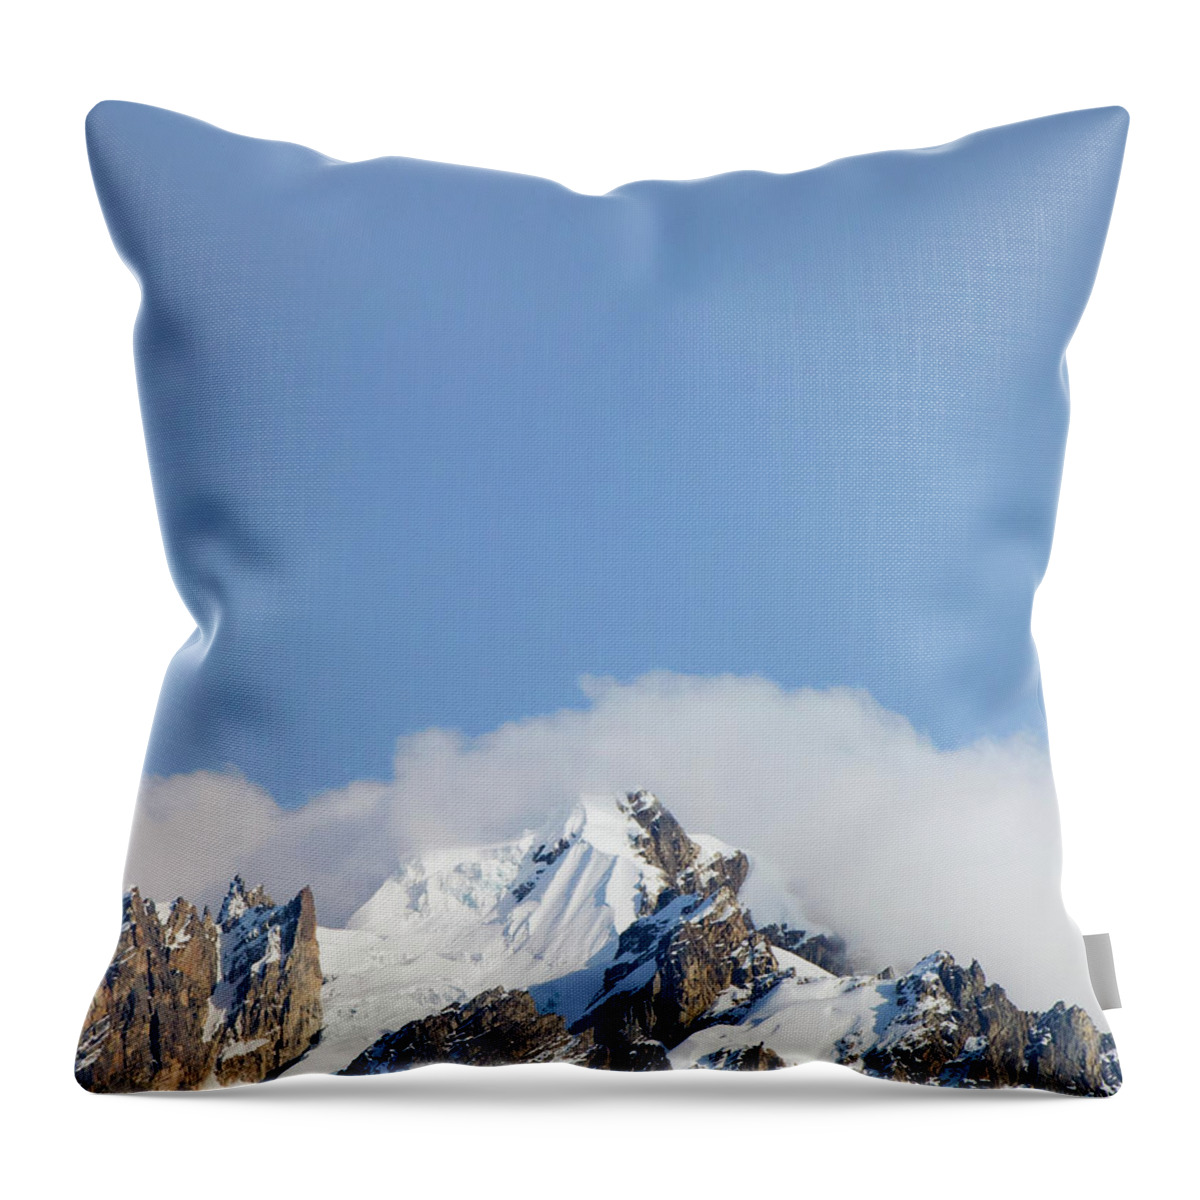 Tranquility Throw Pillow featuring the photograph View Of Snow Cap At Cochayoq, Andes by Cultura Exclusive/karen Fox